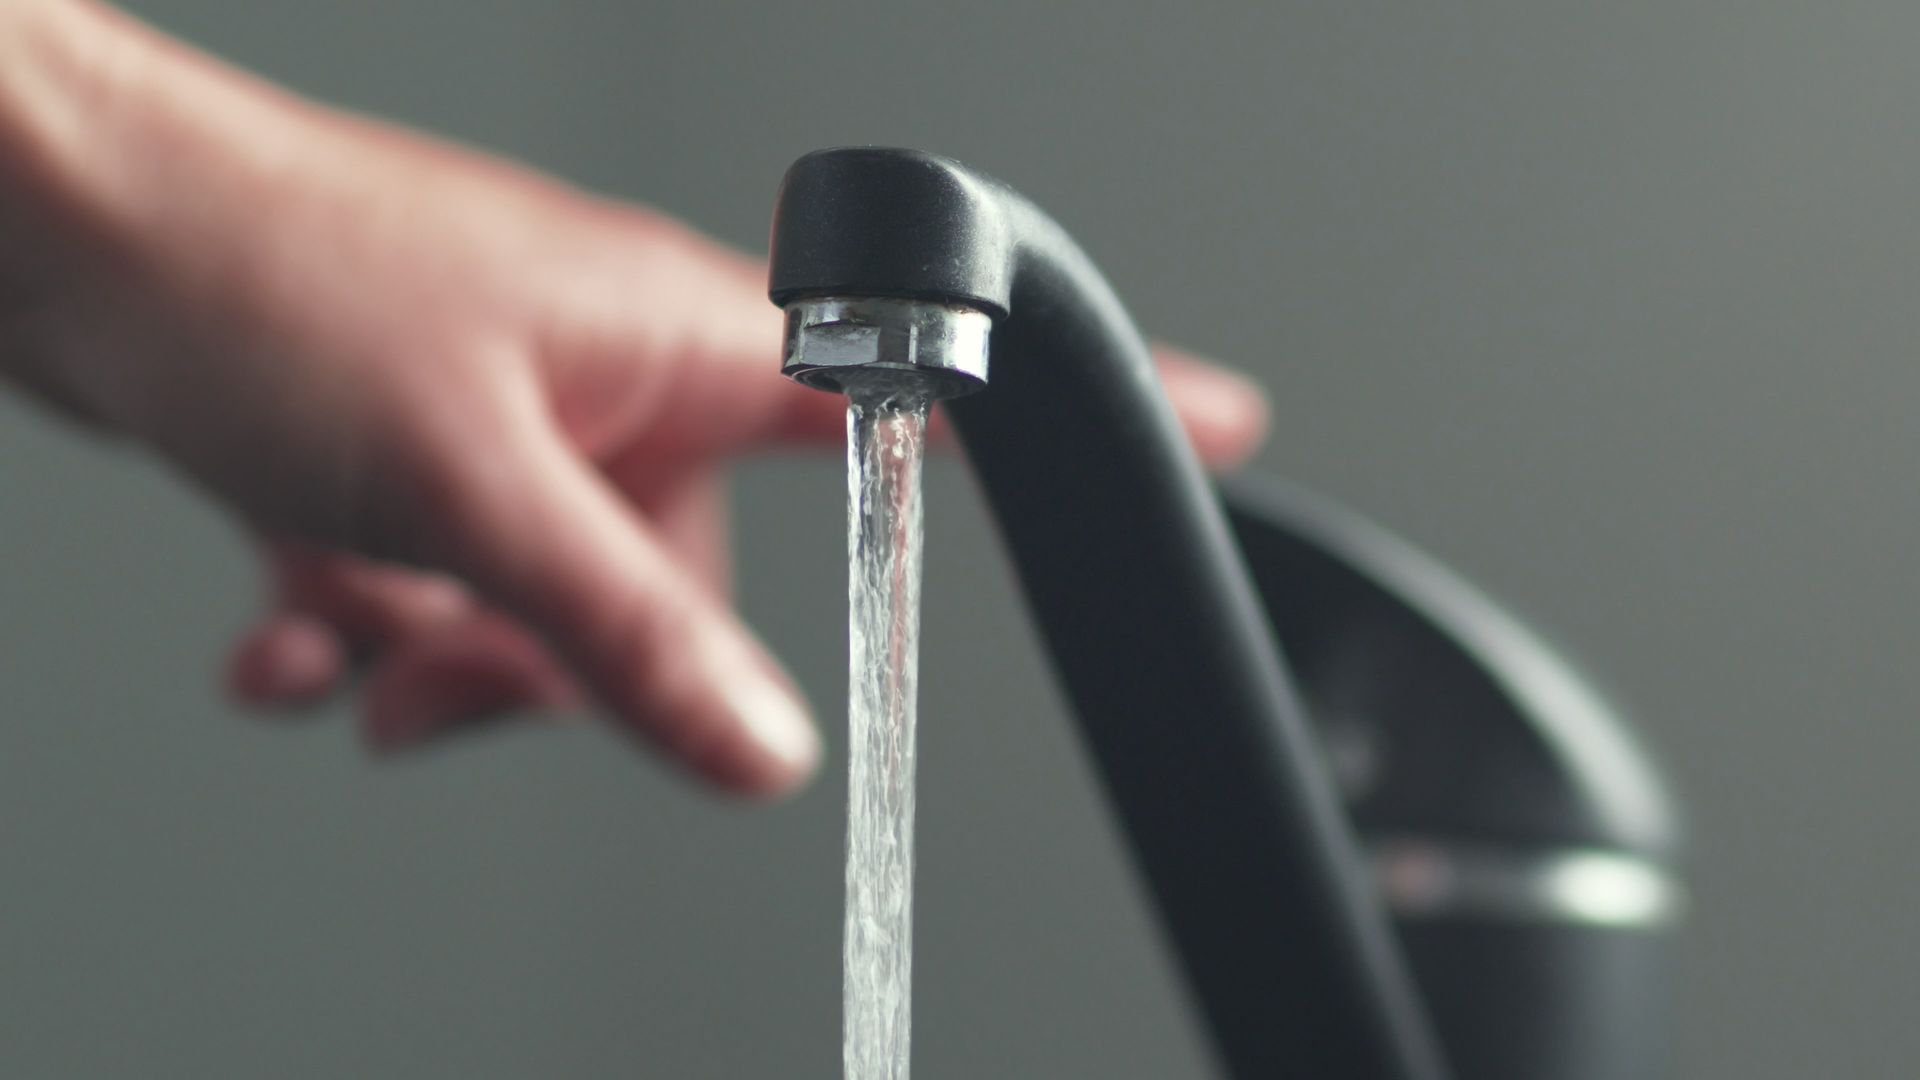 a person is opening a faucet with water running out of it.